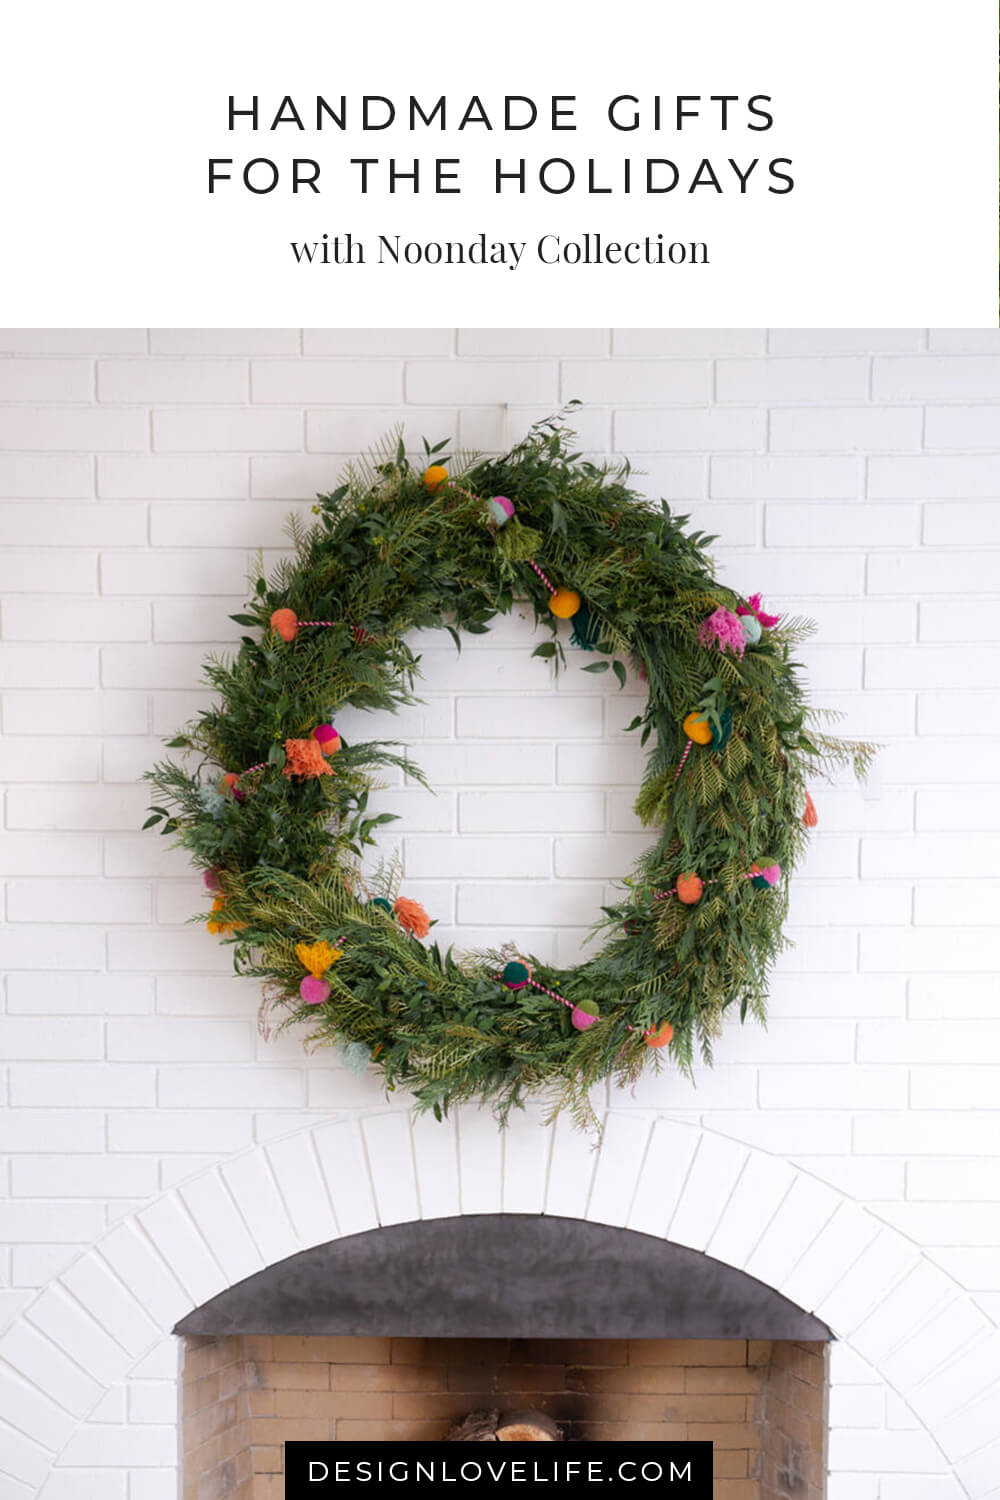 Unique Handmade Gifts by handcrafted Artisans from around the world. Great ideas for Christmas and the Holidays with Noonday Collection and Annie Johnson.